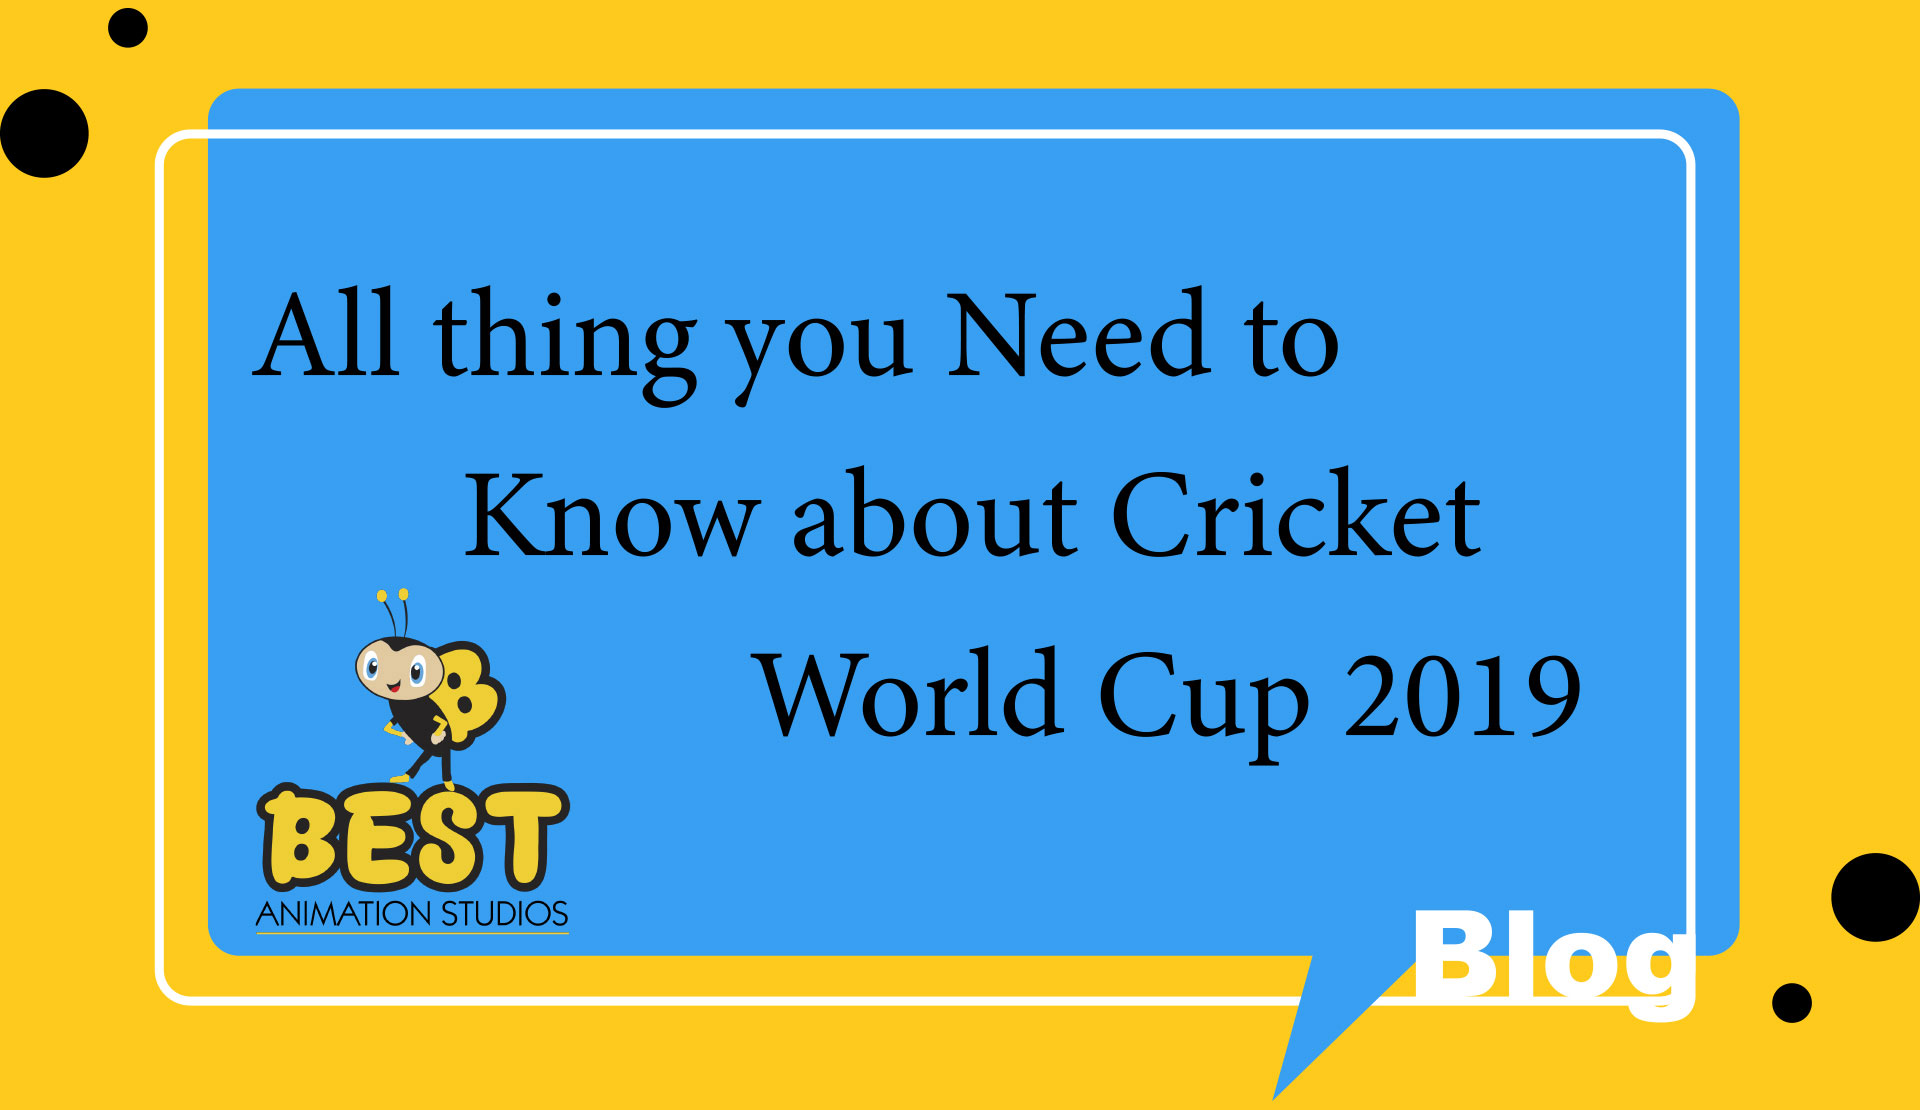 All thing you Need to Know about Cricket World Cup 2019